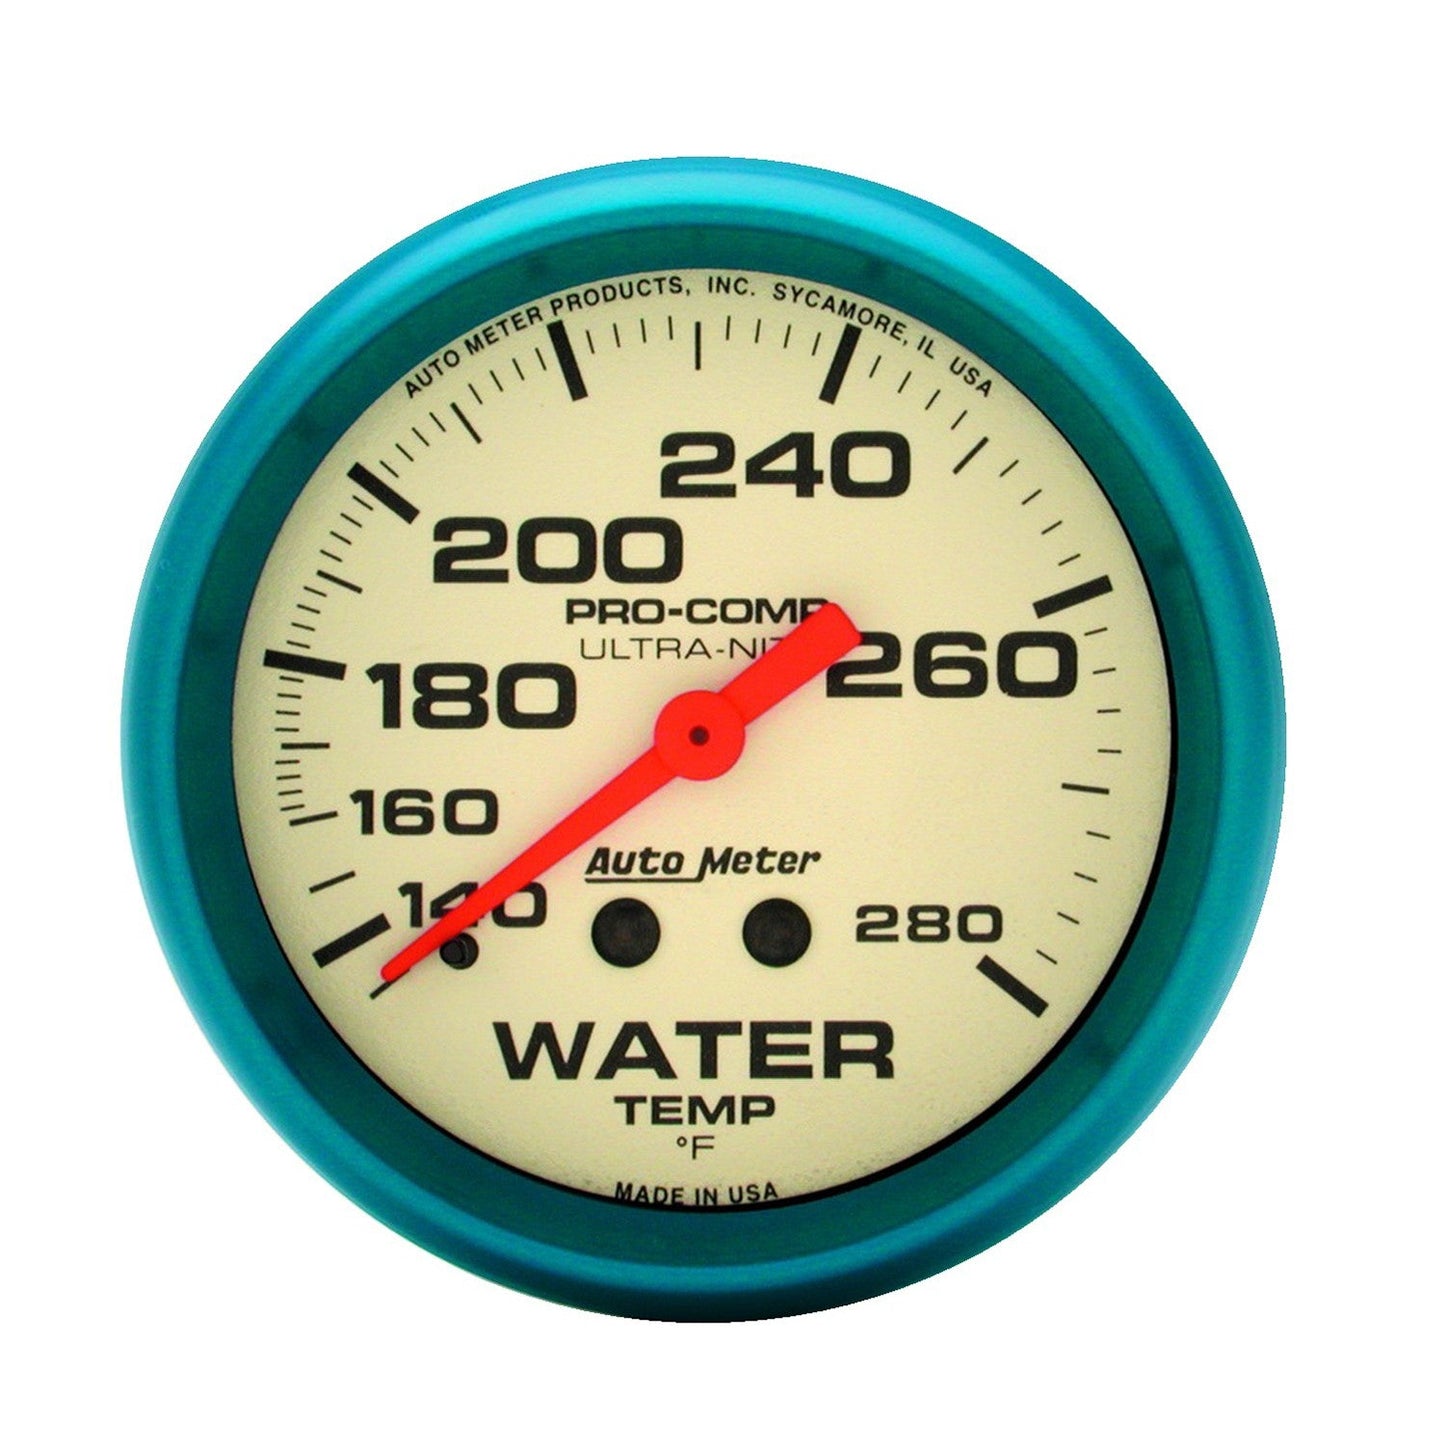 AutoMeter - 2-5/8" WATER TEMPERATURE, 140-280 °F, 6 FT., MECHANICAL, ULTRA-NITE (4531)